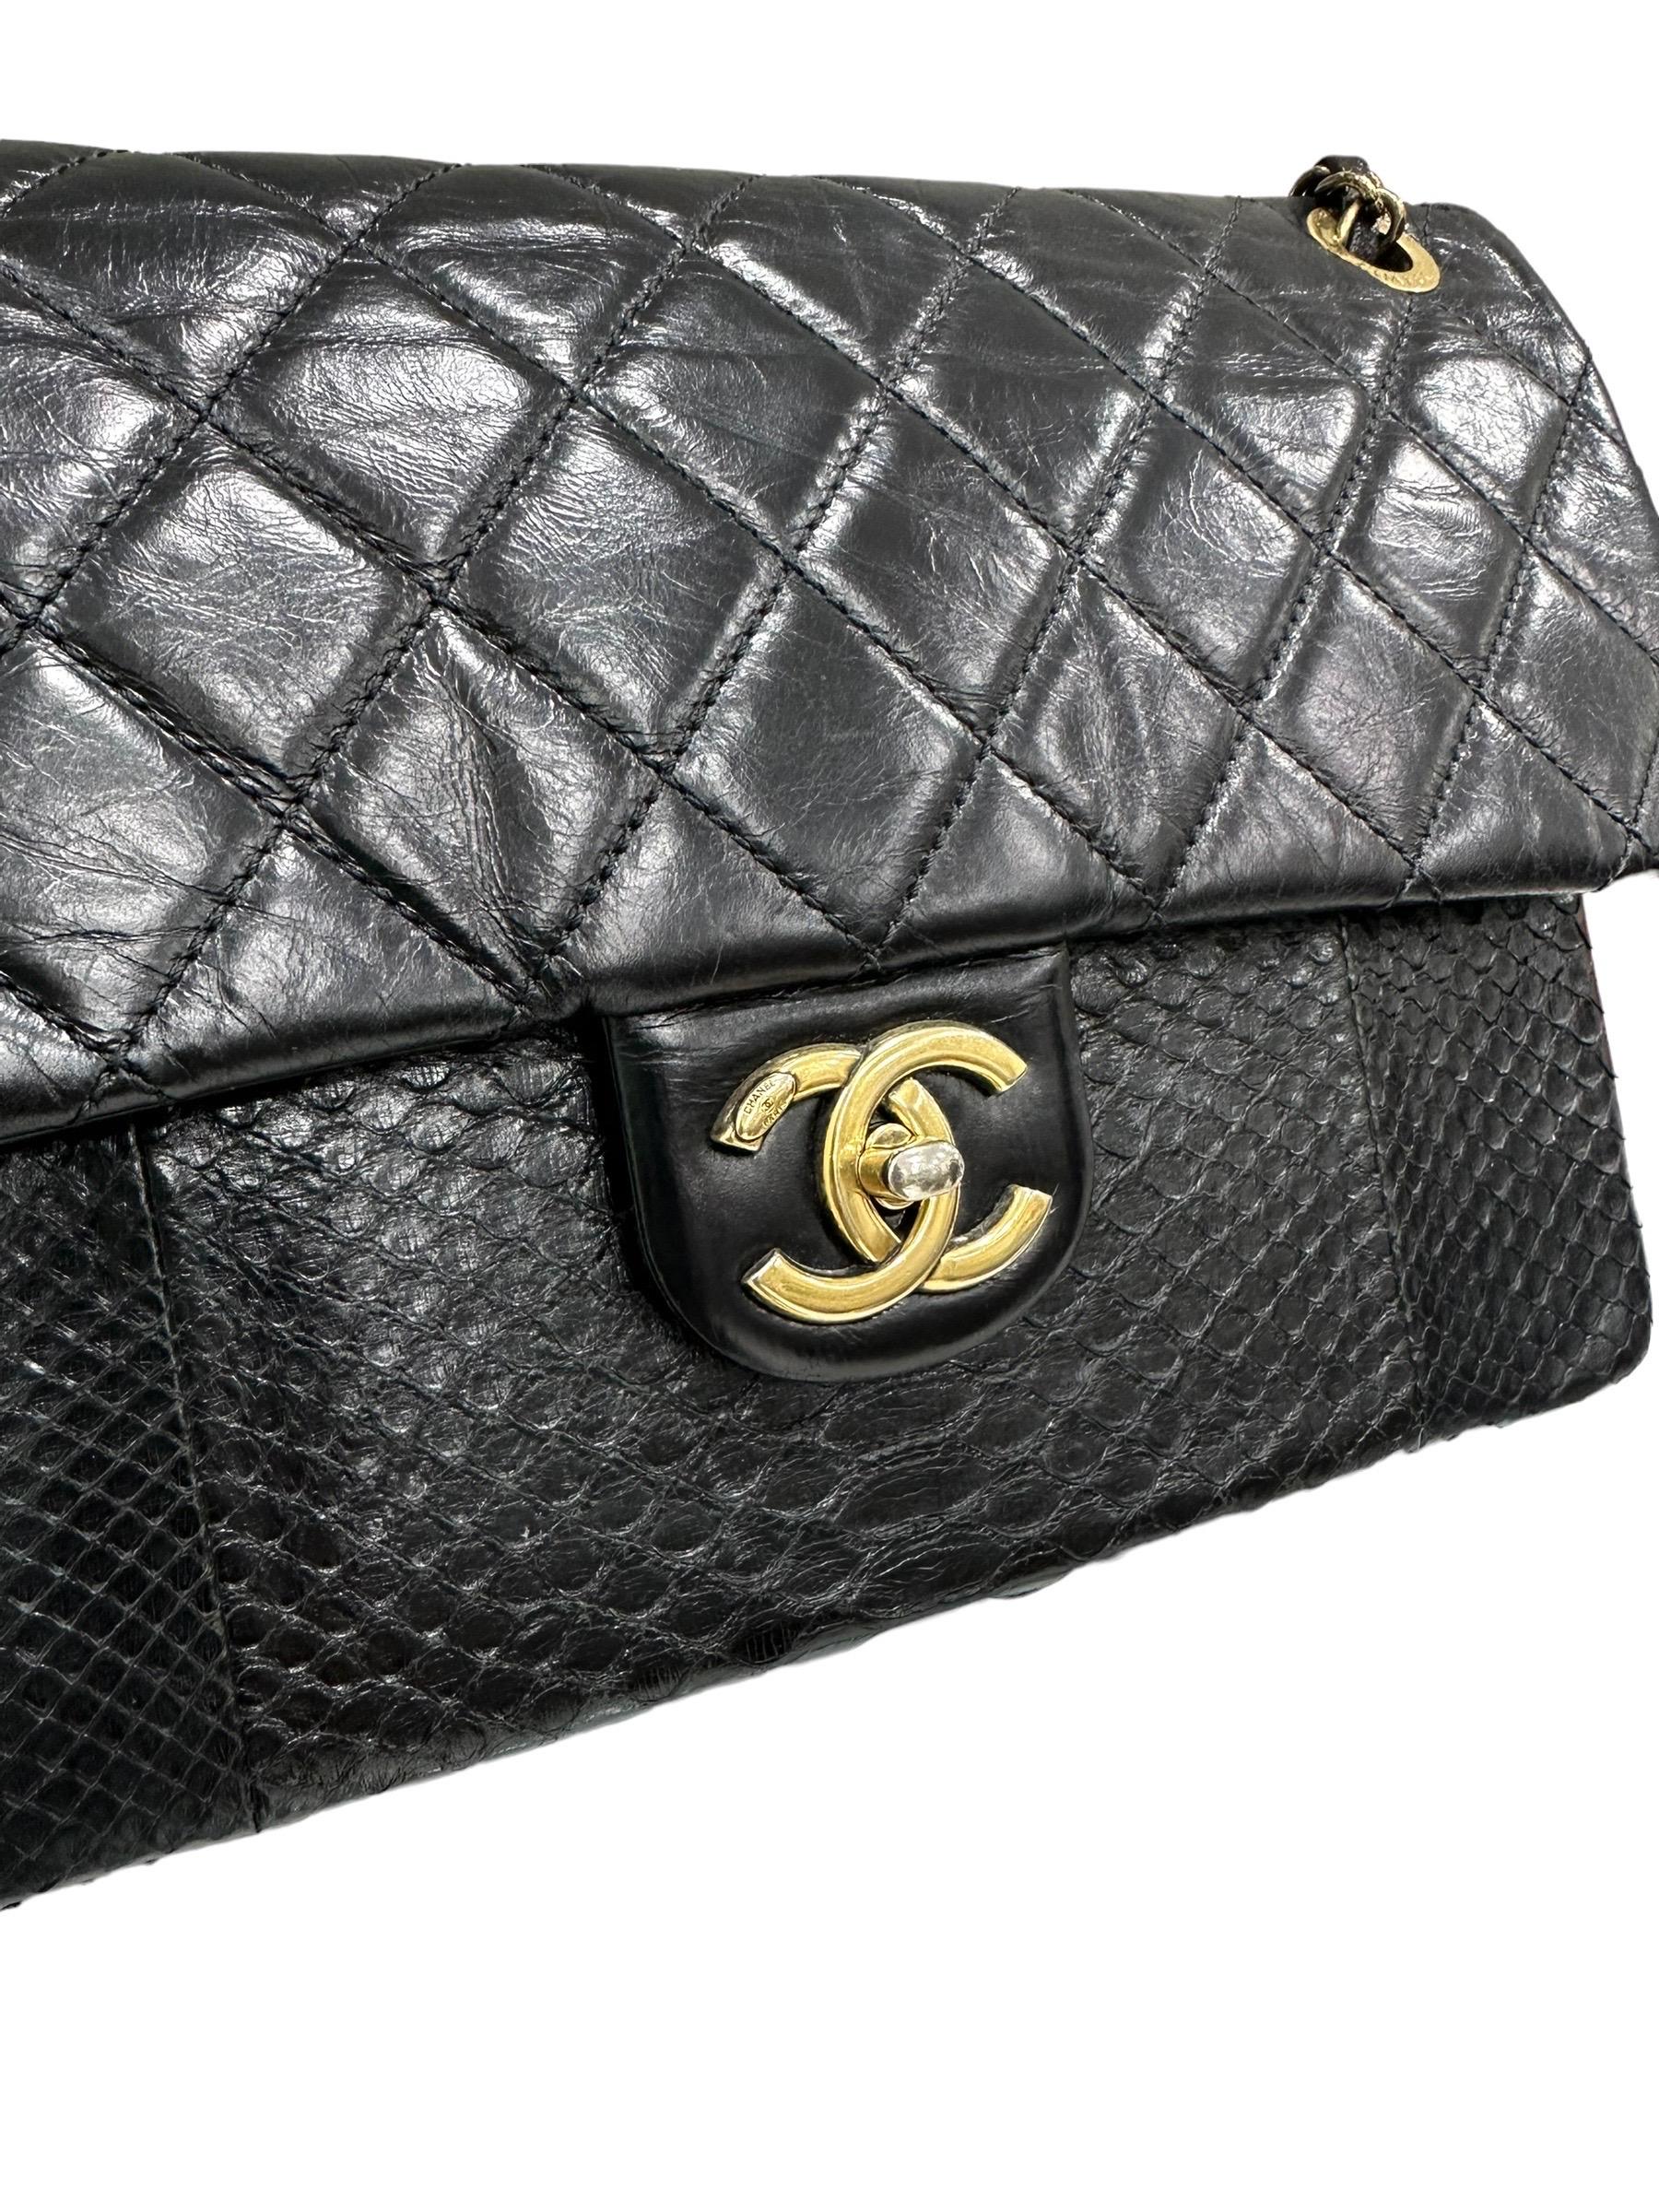 Chanel bag, Urban Mix model, made in black leather and golden hardware. Equipped with a flap with CC logo turn lock closure, internally lined in burgundy fabric, quite roomy. Equipped with a sliding shoulder strap in leather and braided chain, to